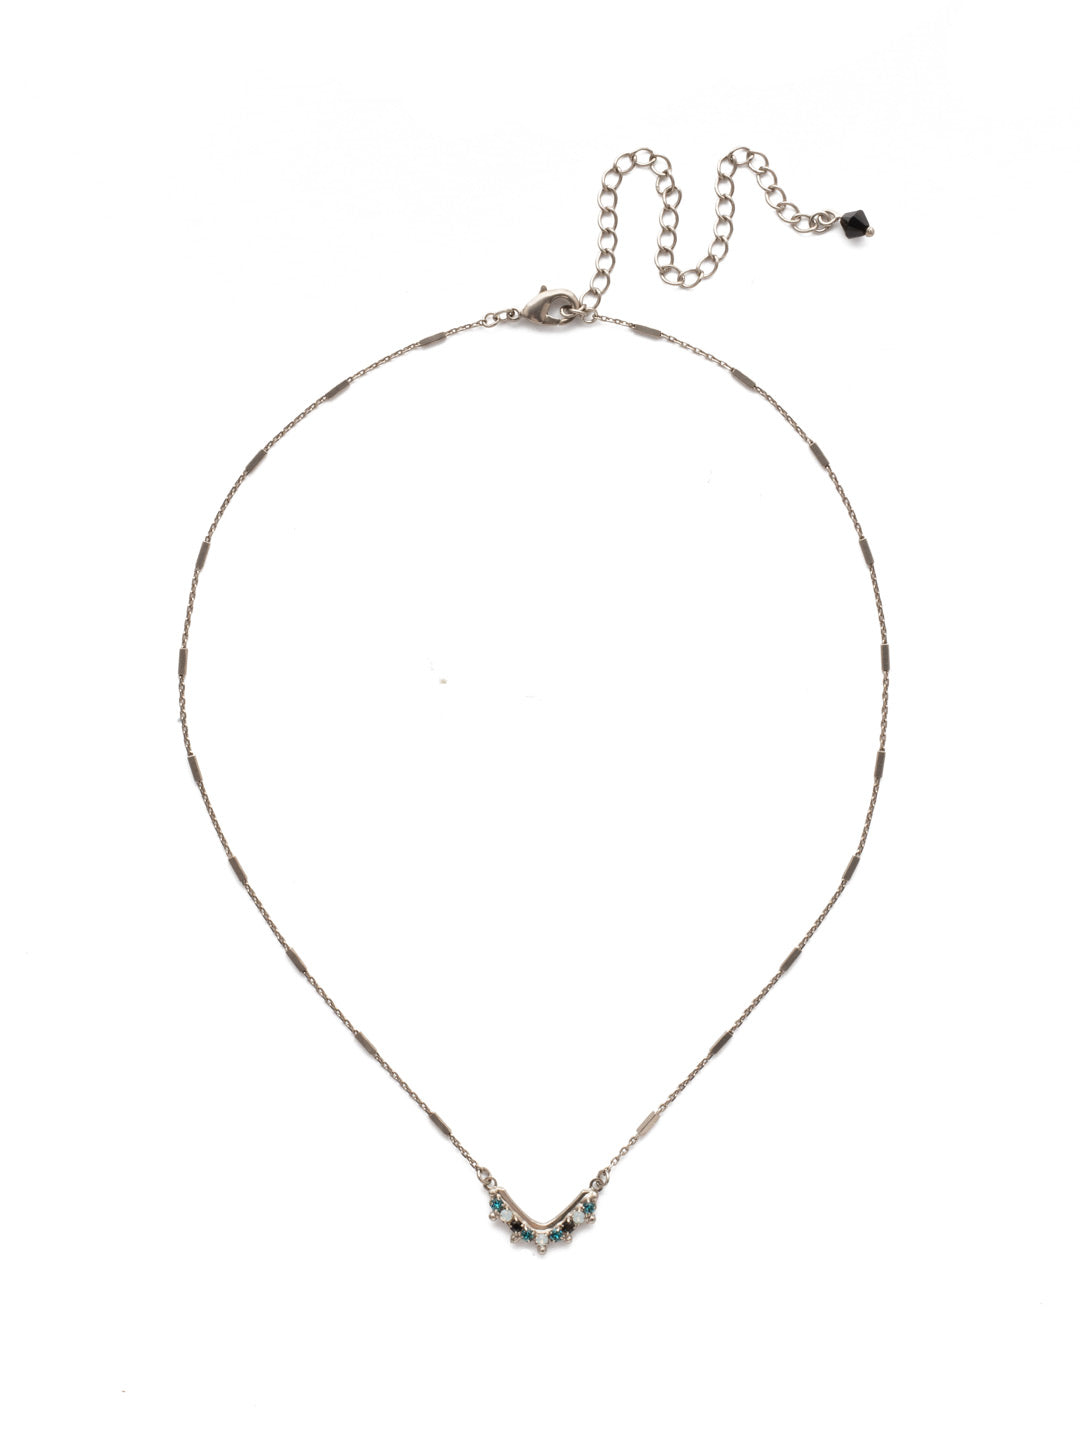 Jagged Pendant Necklace - NDW9ASGDG - A small crystal-enveloped chevron combines with ball chain in this simple look.